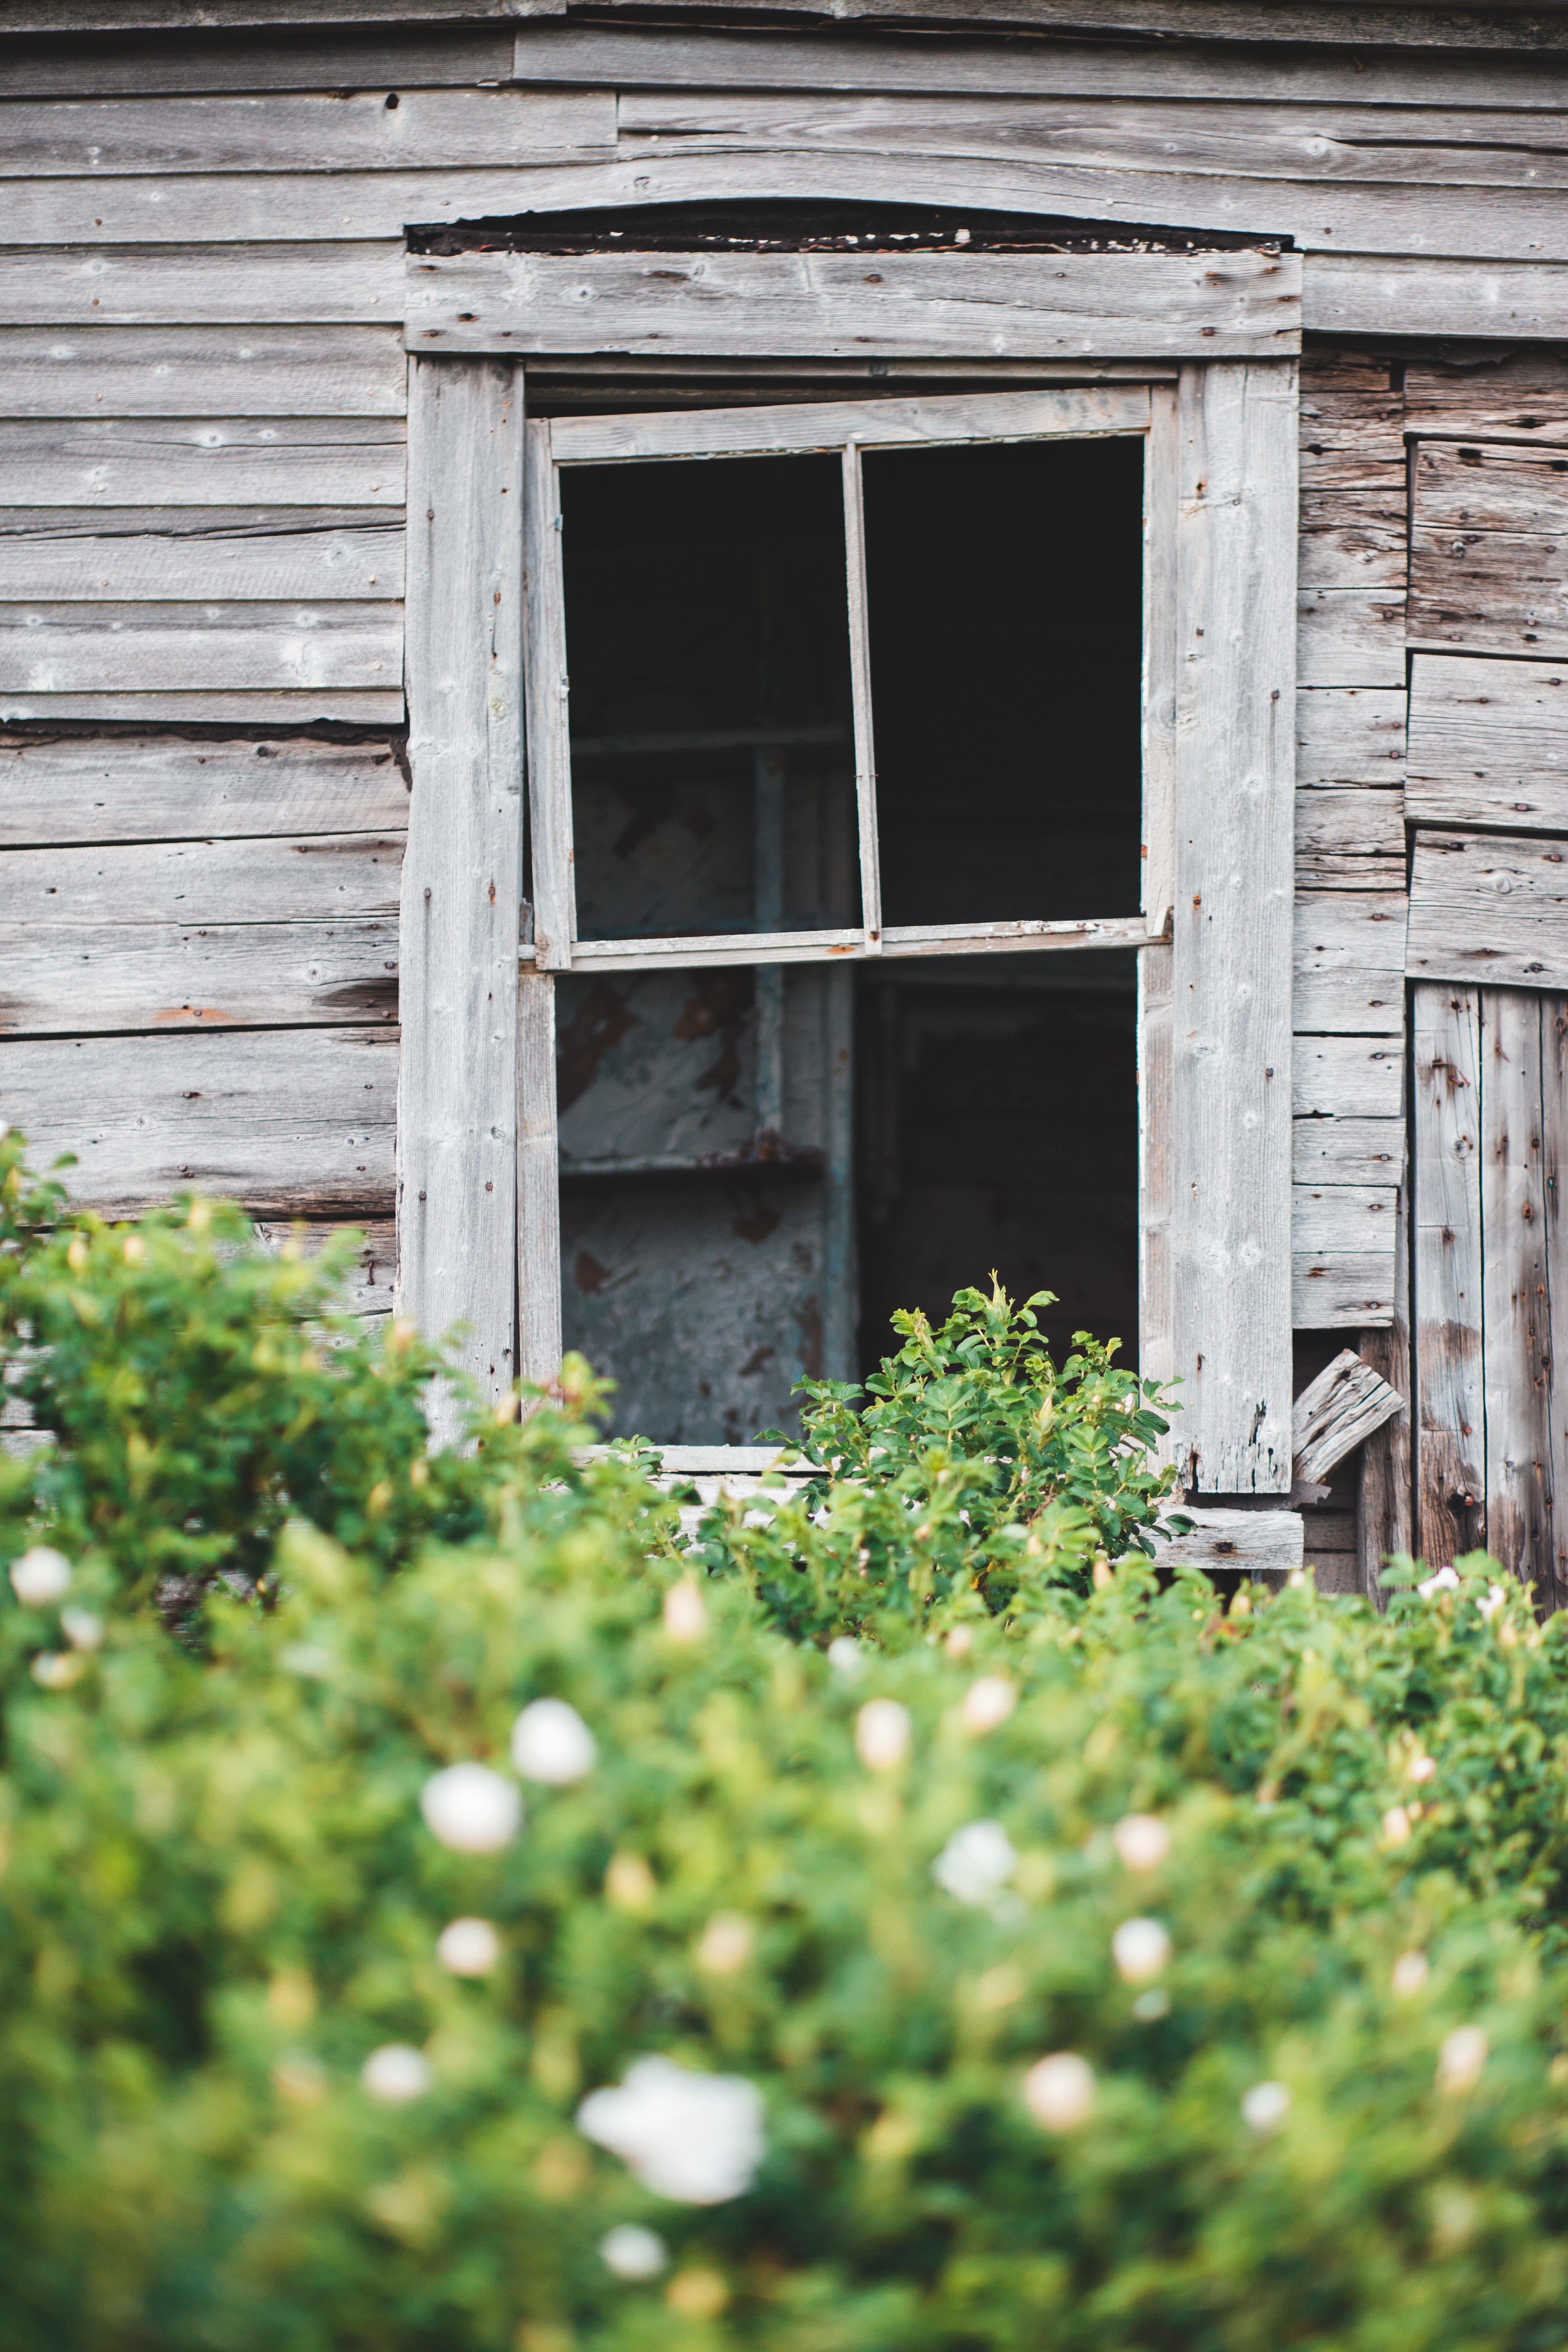 Sheila's house was in need of repairs. | Source: Pexels